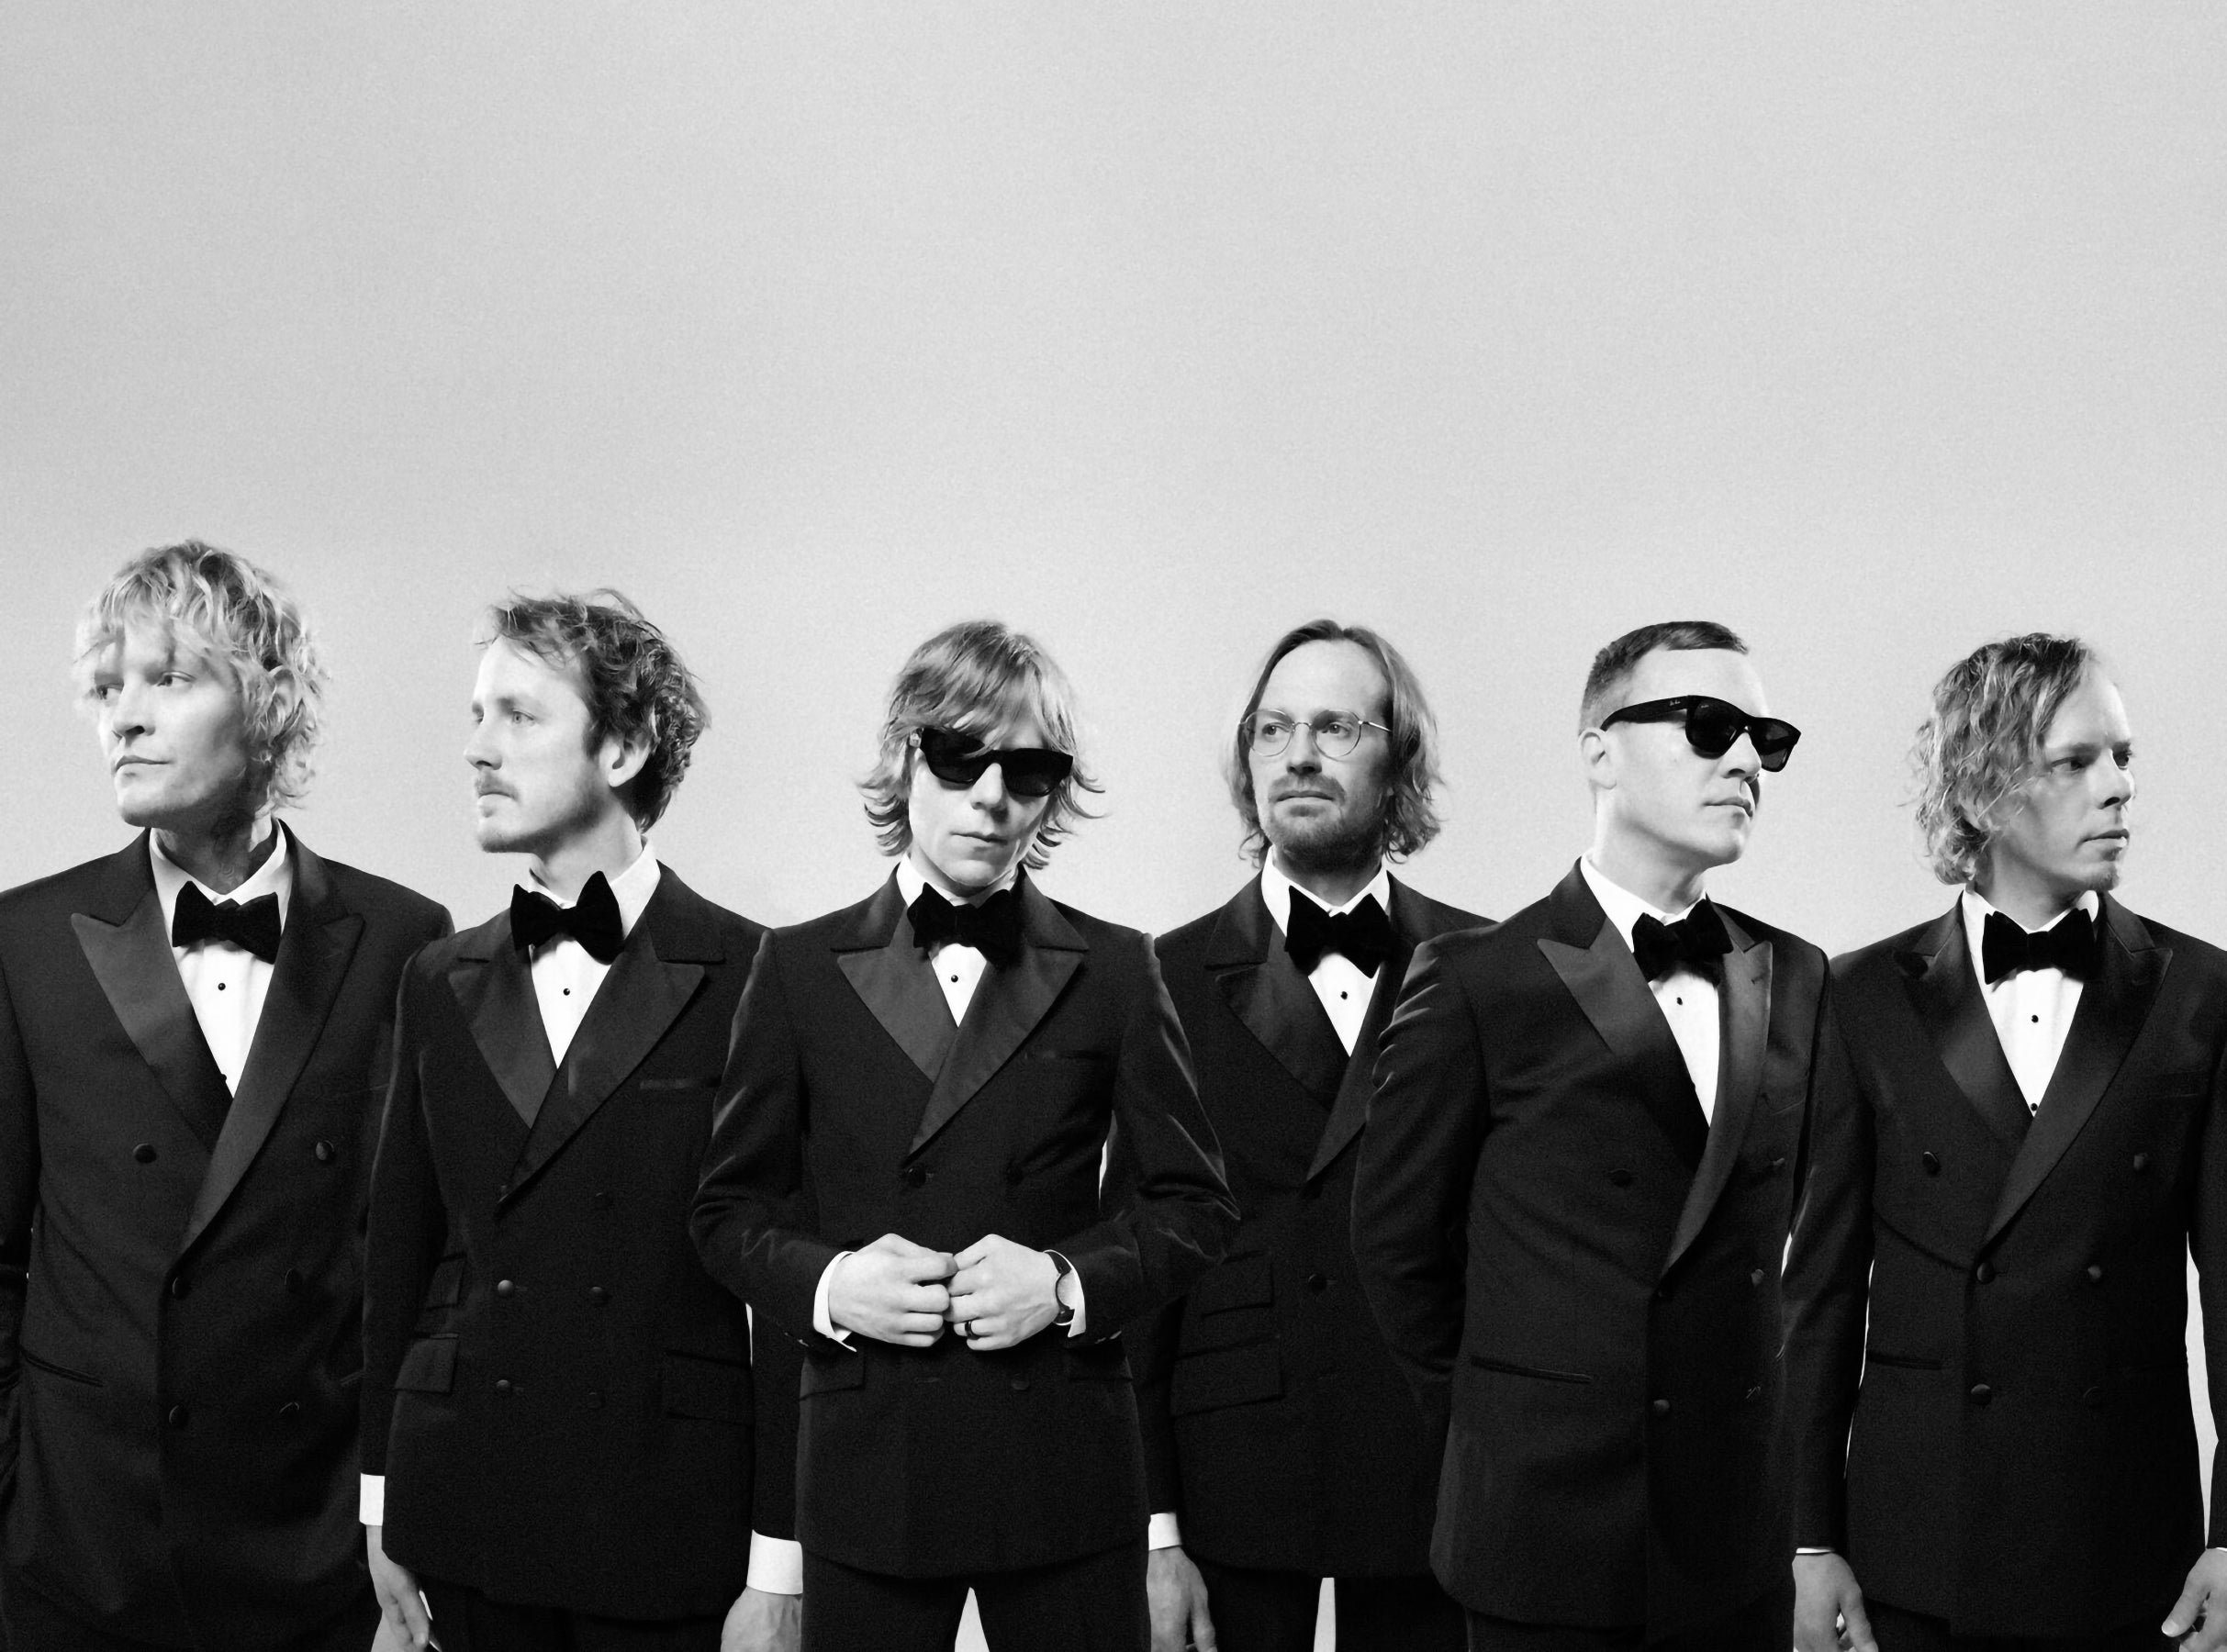 members only presale password for Cage the Elephant - Neon Pill Tour affordable tickets in Edmonton